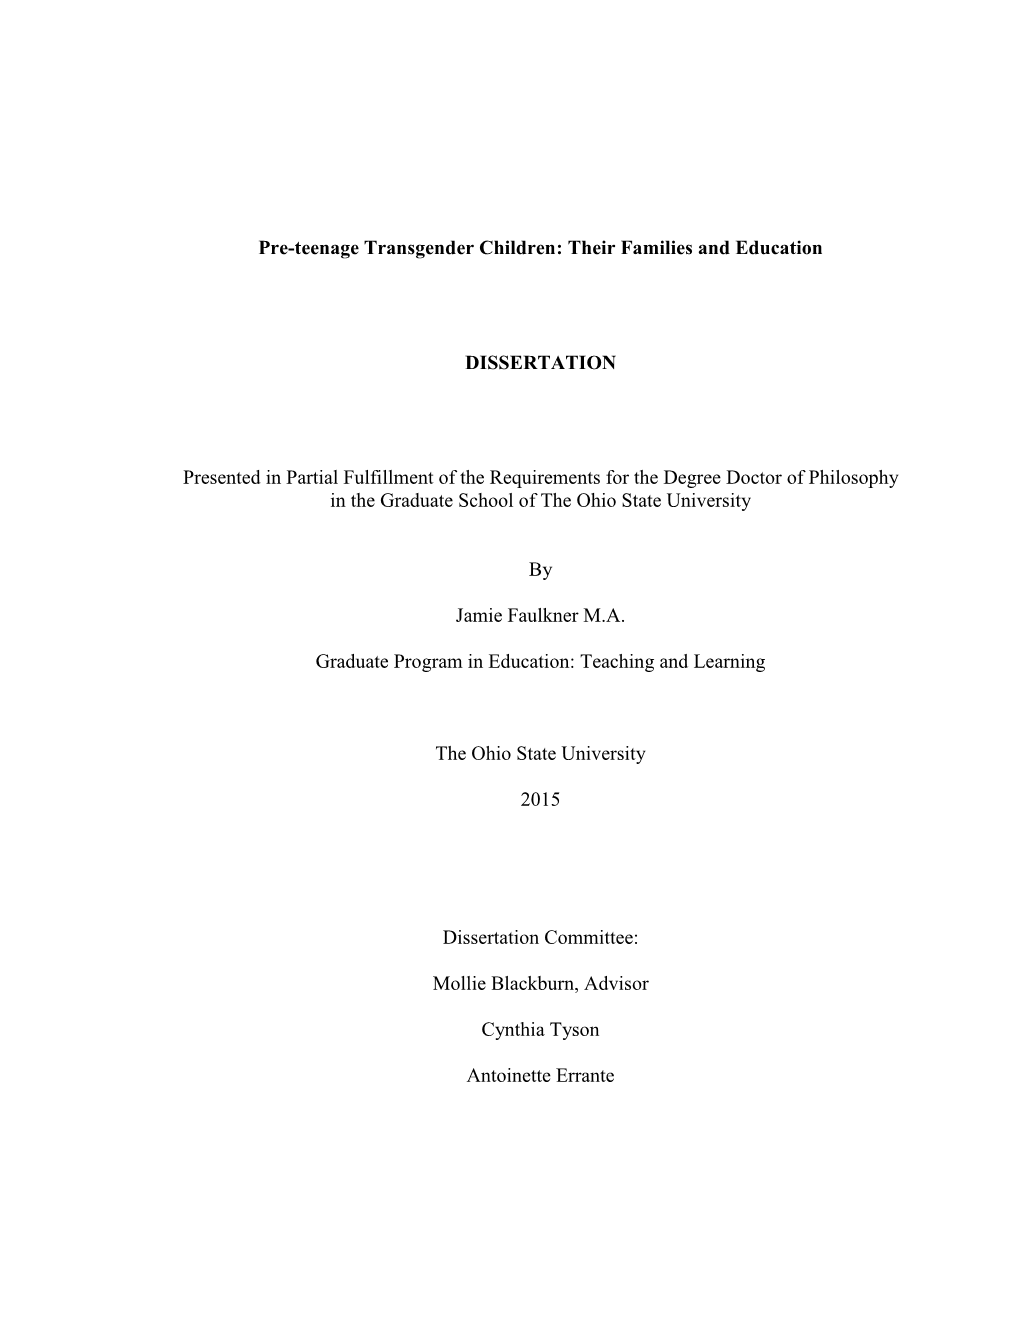 Pre-Teenage Transgender Children: Their Families and Education DISSERTATION Presented in Partial Fulfillment of the Requirements